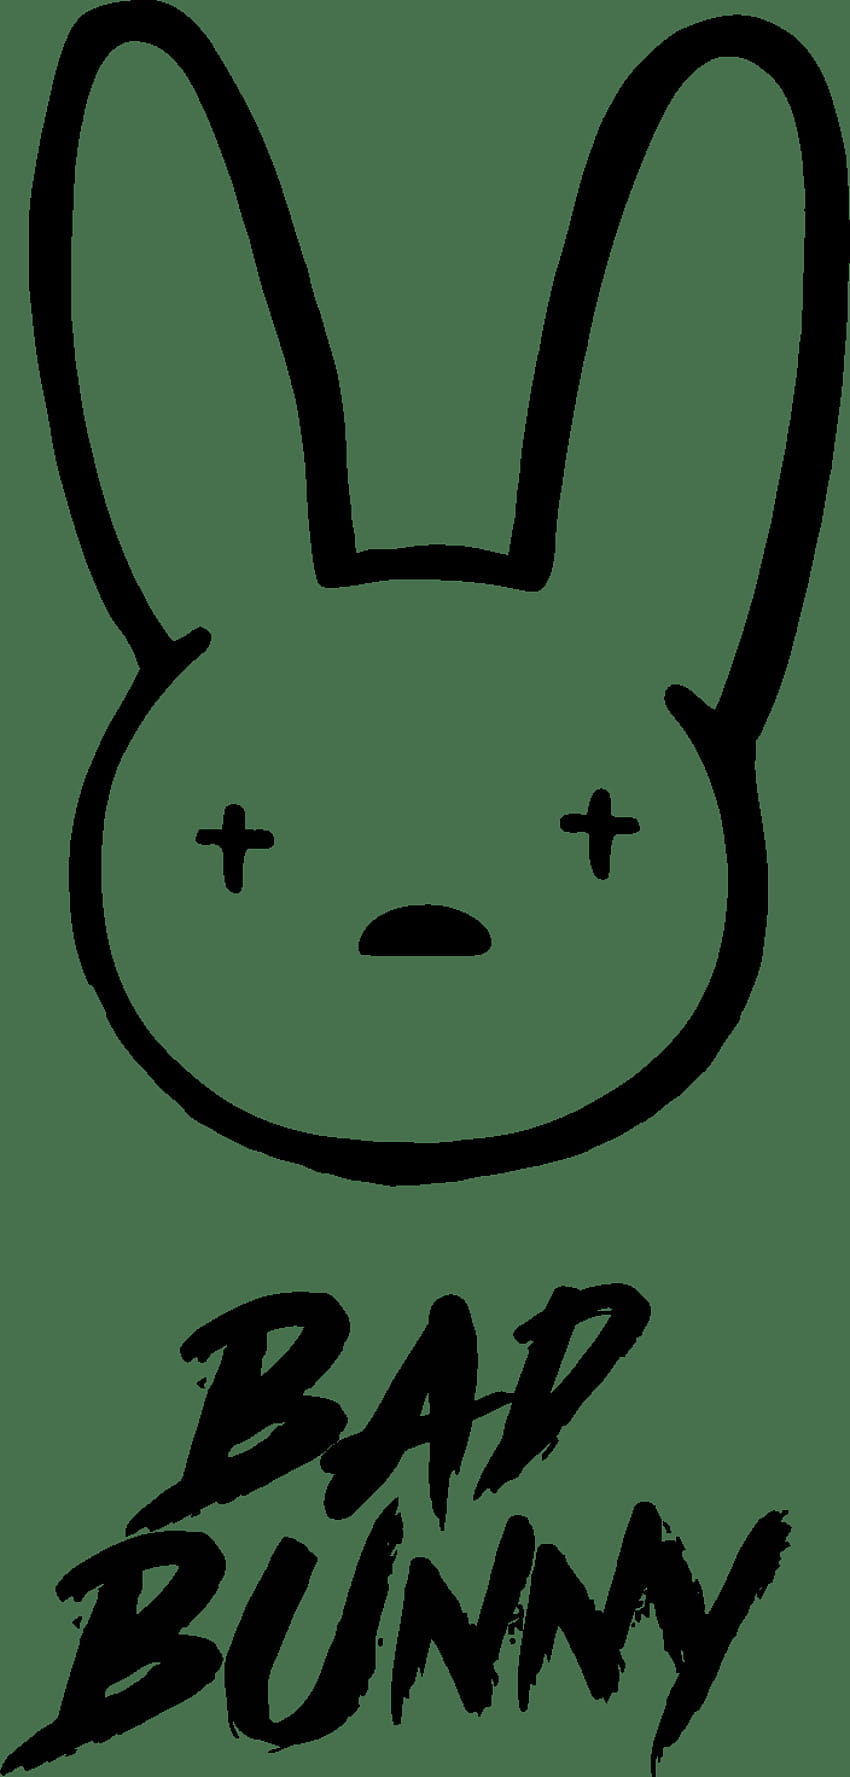 Bad Bunny logo download in SVG or PNG - LogosArchive